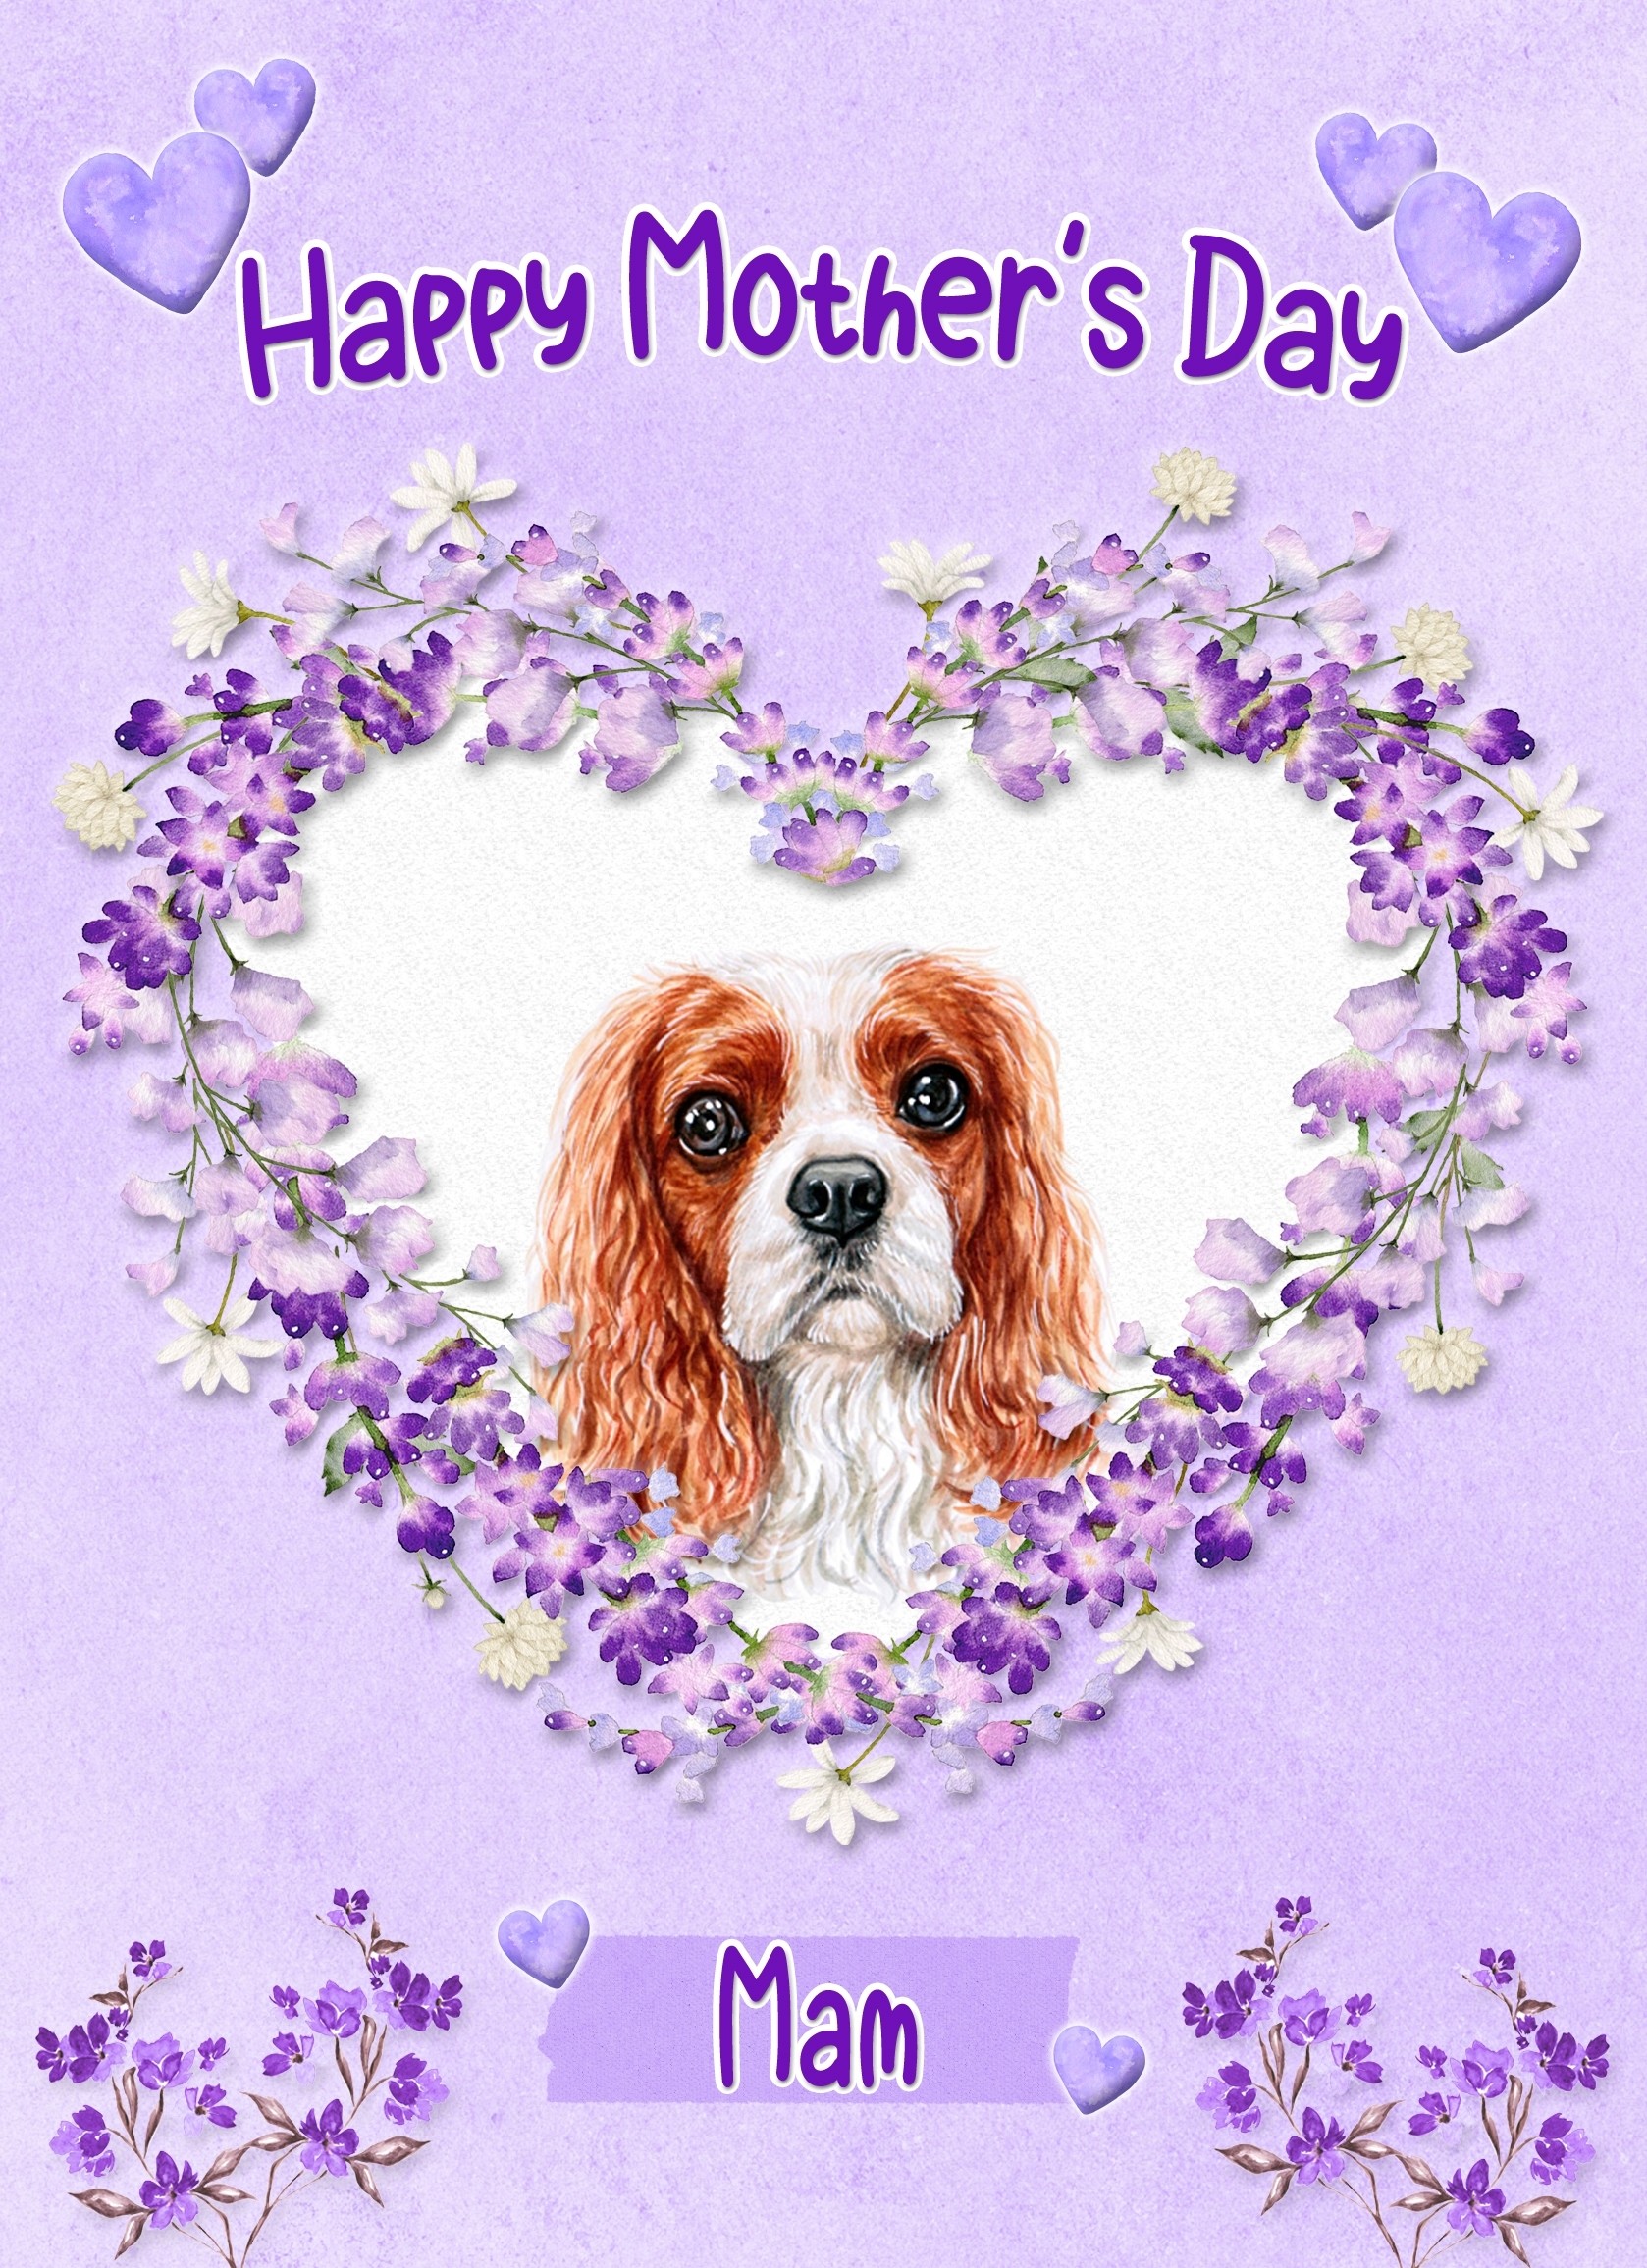 King Charles Spaniel Dog Mothers Day Card (Happy Mothers, Mam)